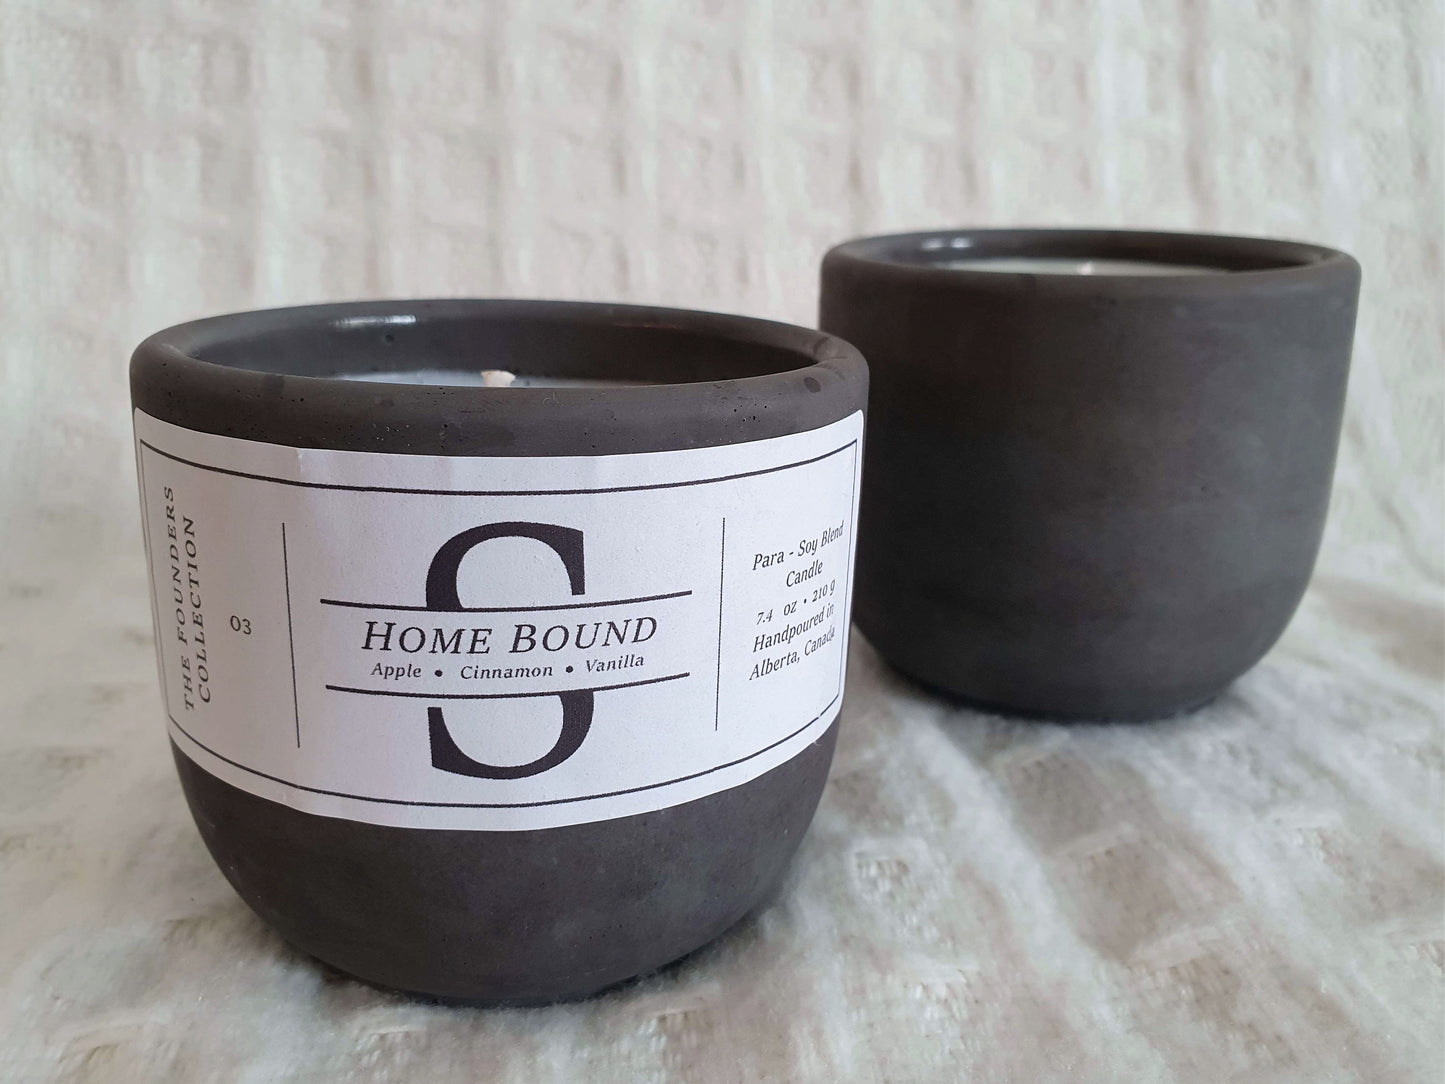 03 Home Bound 3" Concrete Candle